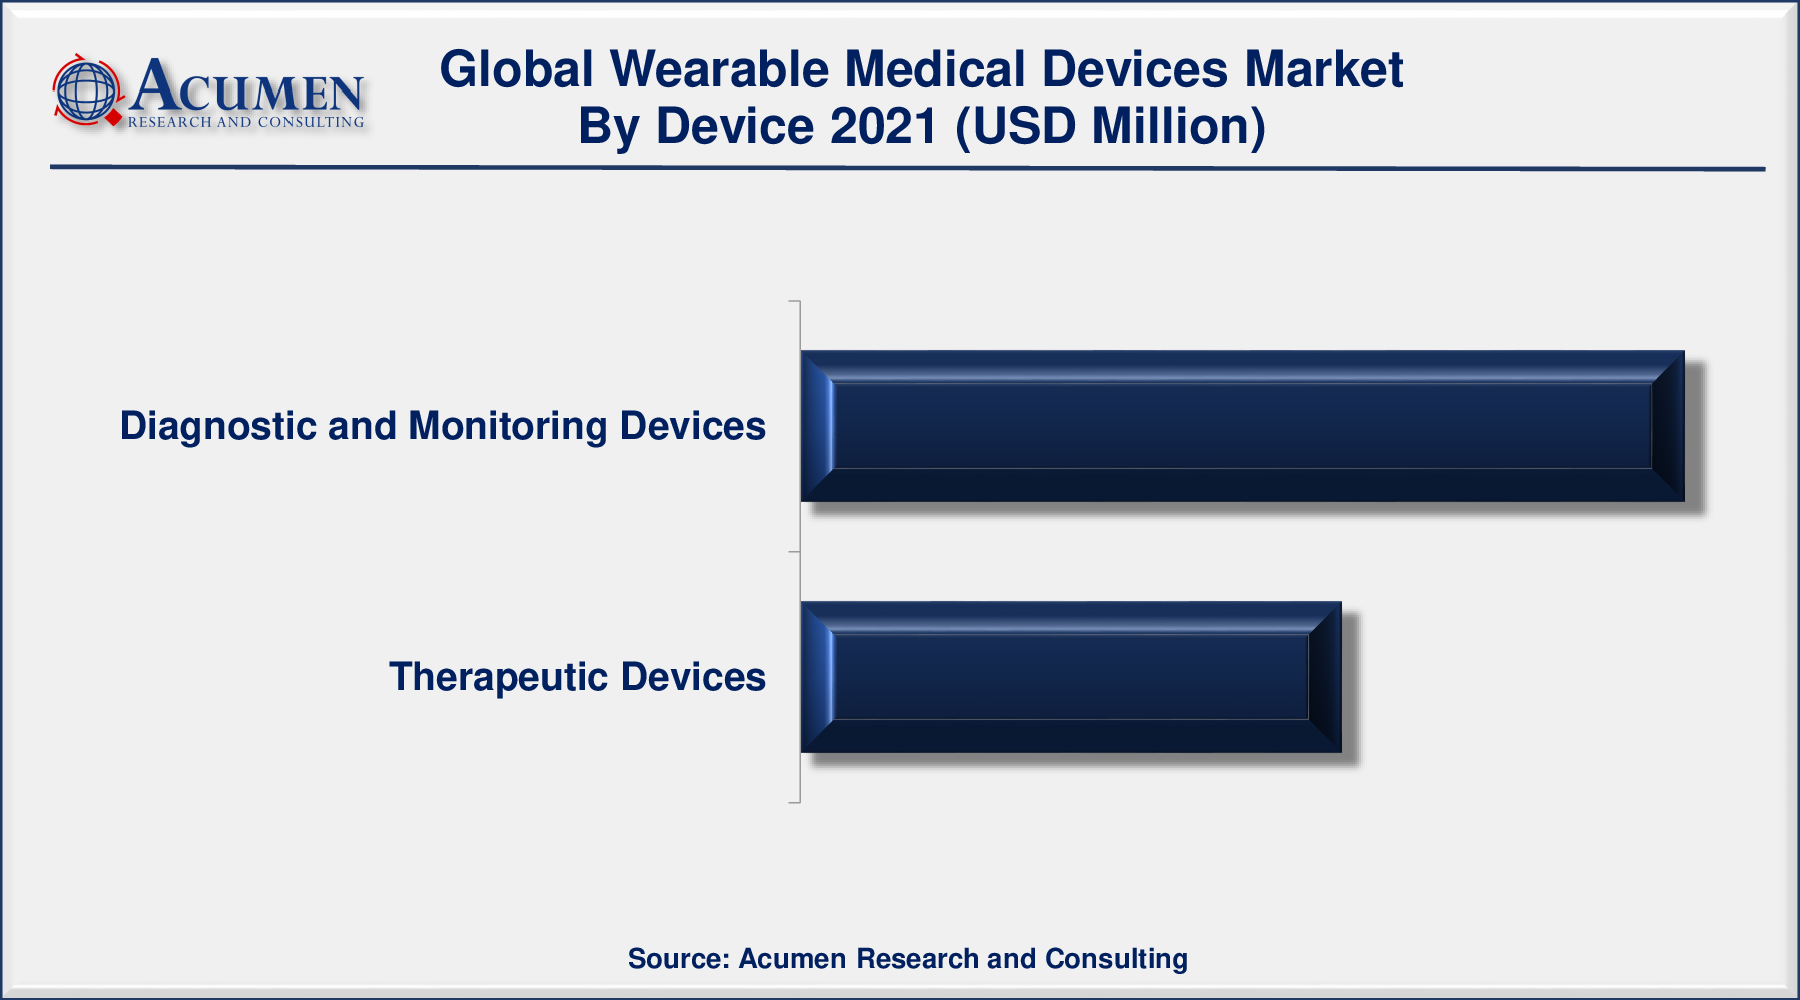 Wearable Medical Devices Market Size Accounted for USD 23,581 Million in 2021 and is predicted to be worth USD 188,398 Million by 2030